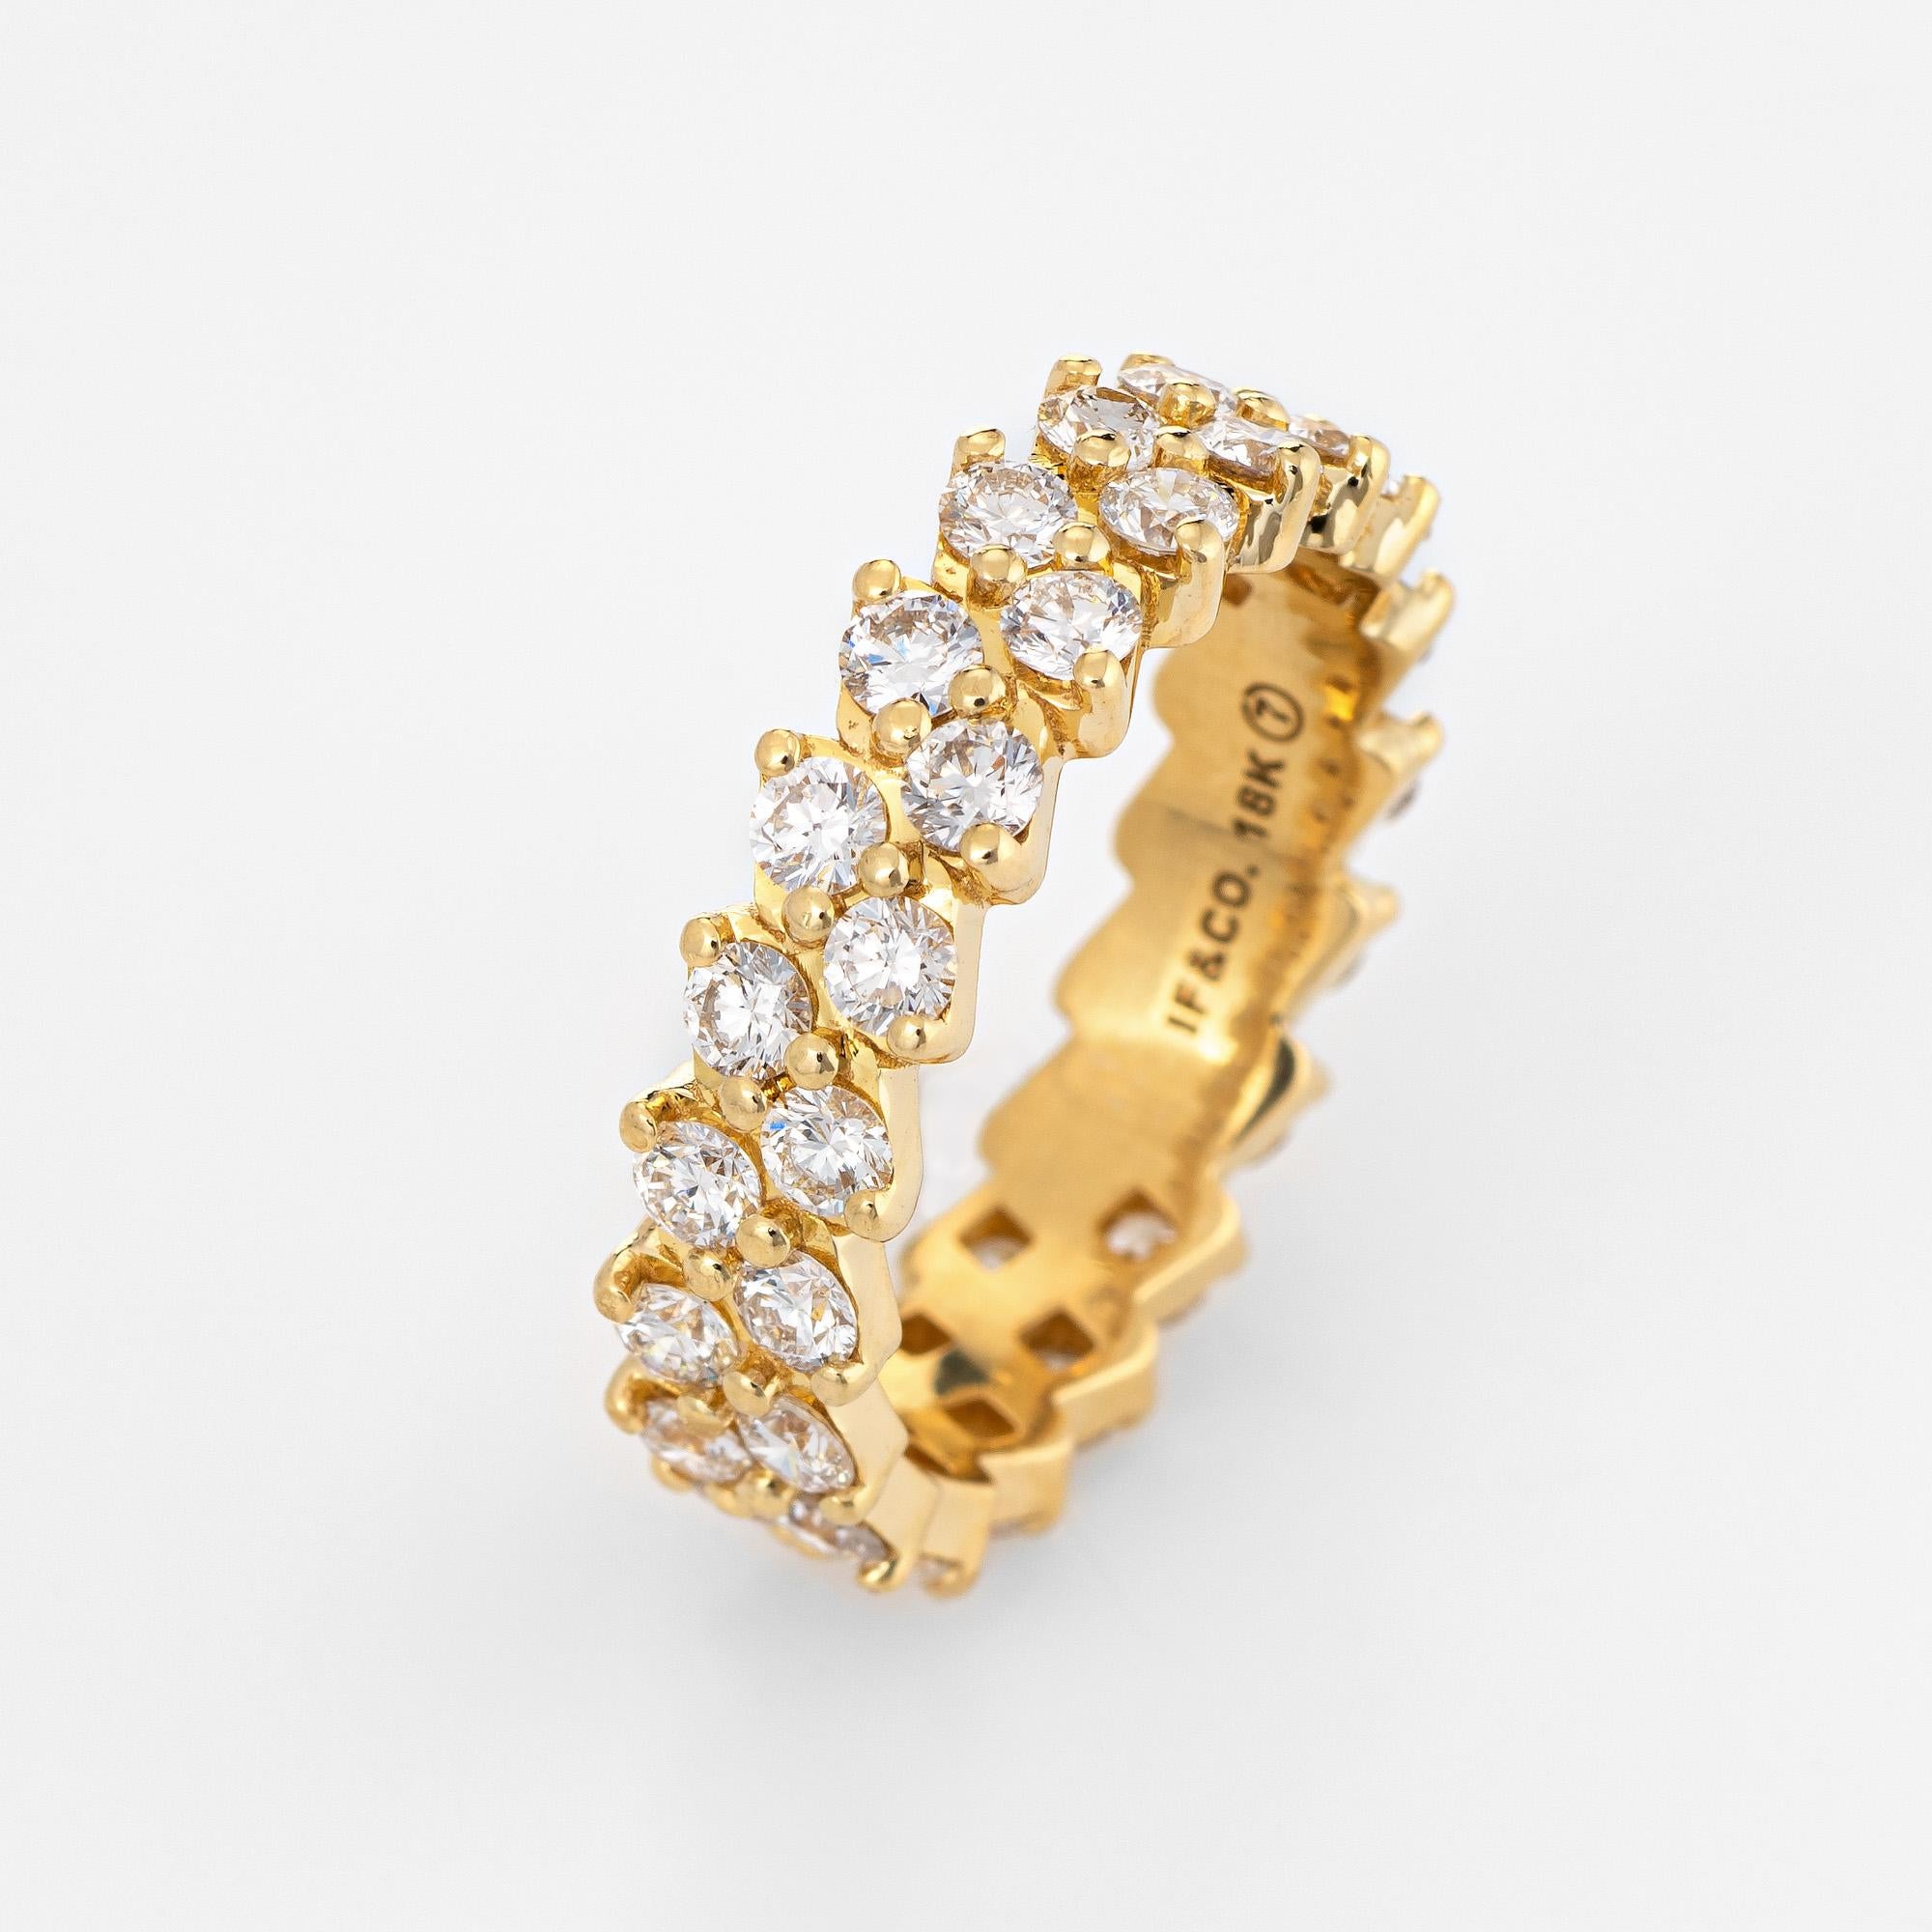 Stylish Millo Enzo diamond eternity ring crafted in 18 karat yellow gold. 

Round brilliant cut diamonds total an estimated 2.25 carats (estimated at H-I color and VS2-SI1 clarity). 

The ring is made by IF & Co, a Los Angeles based jeweler known